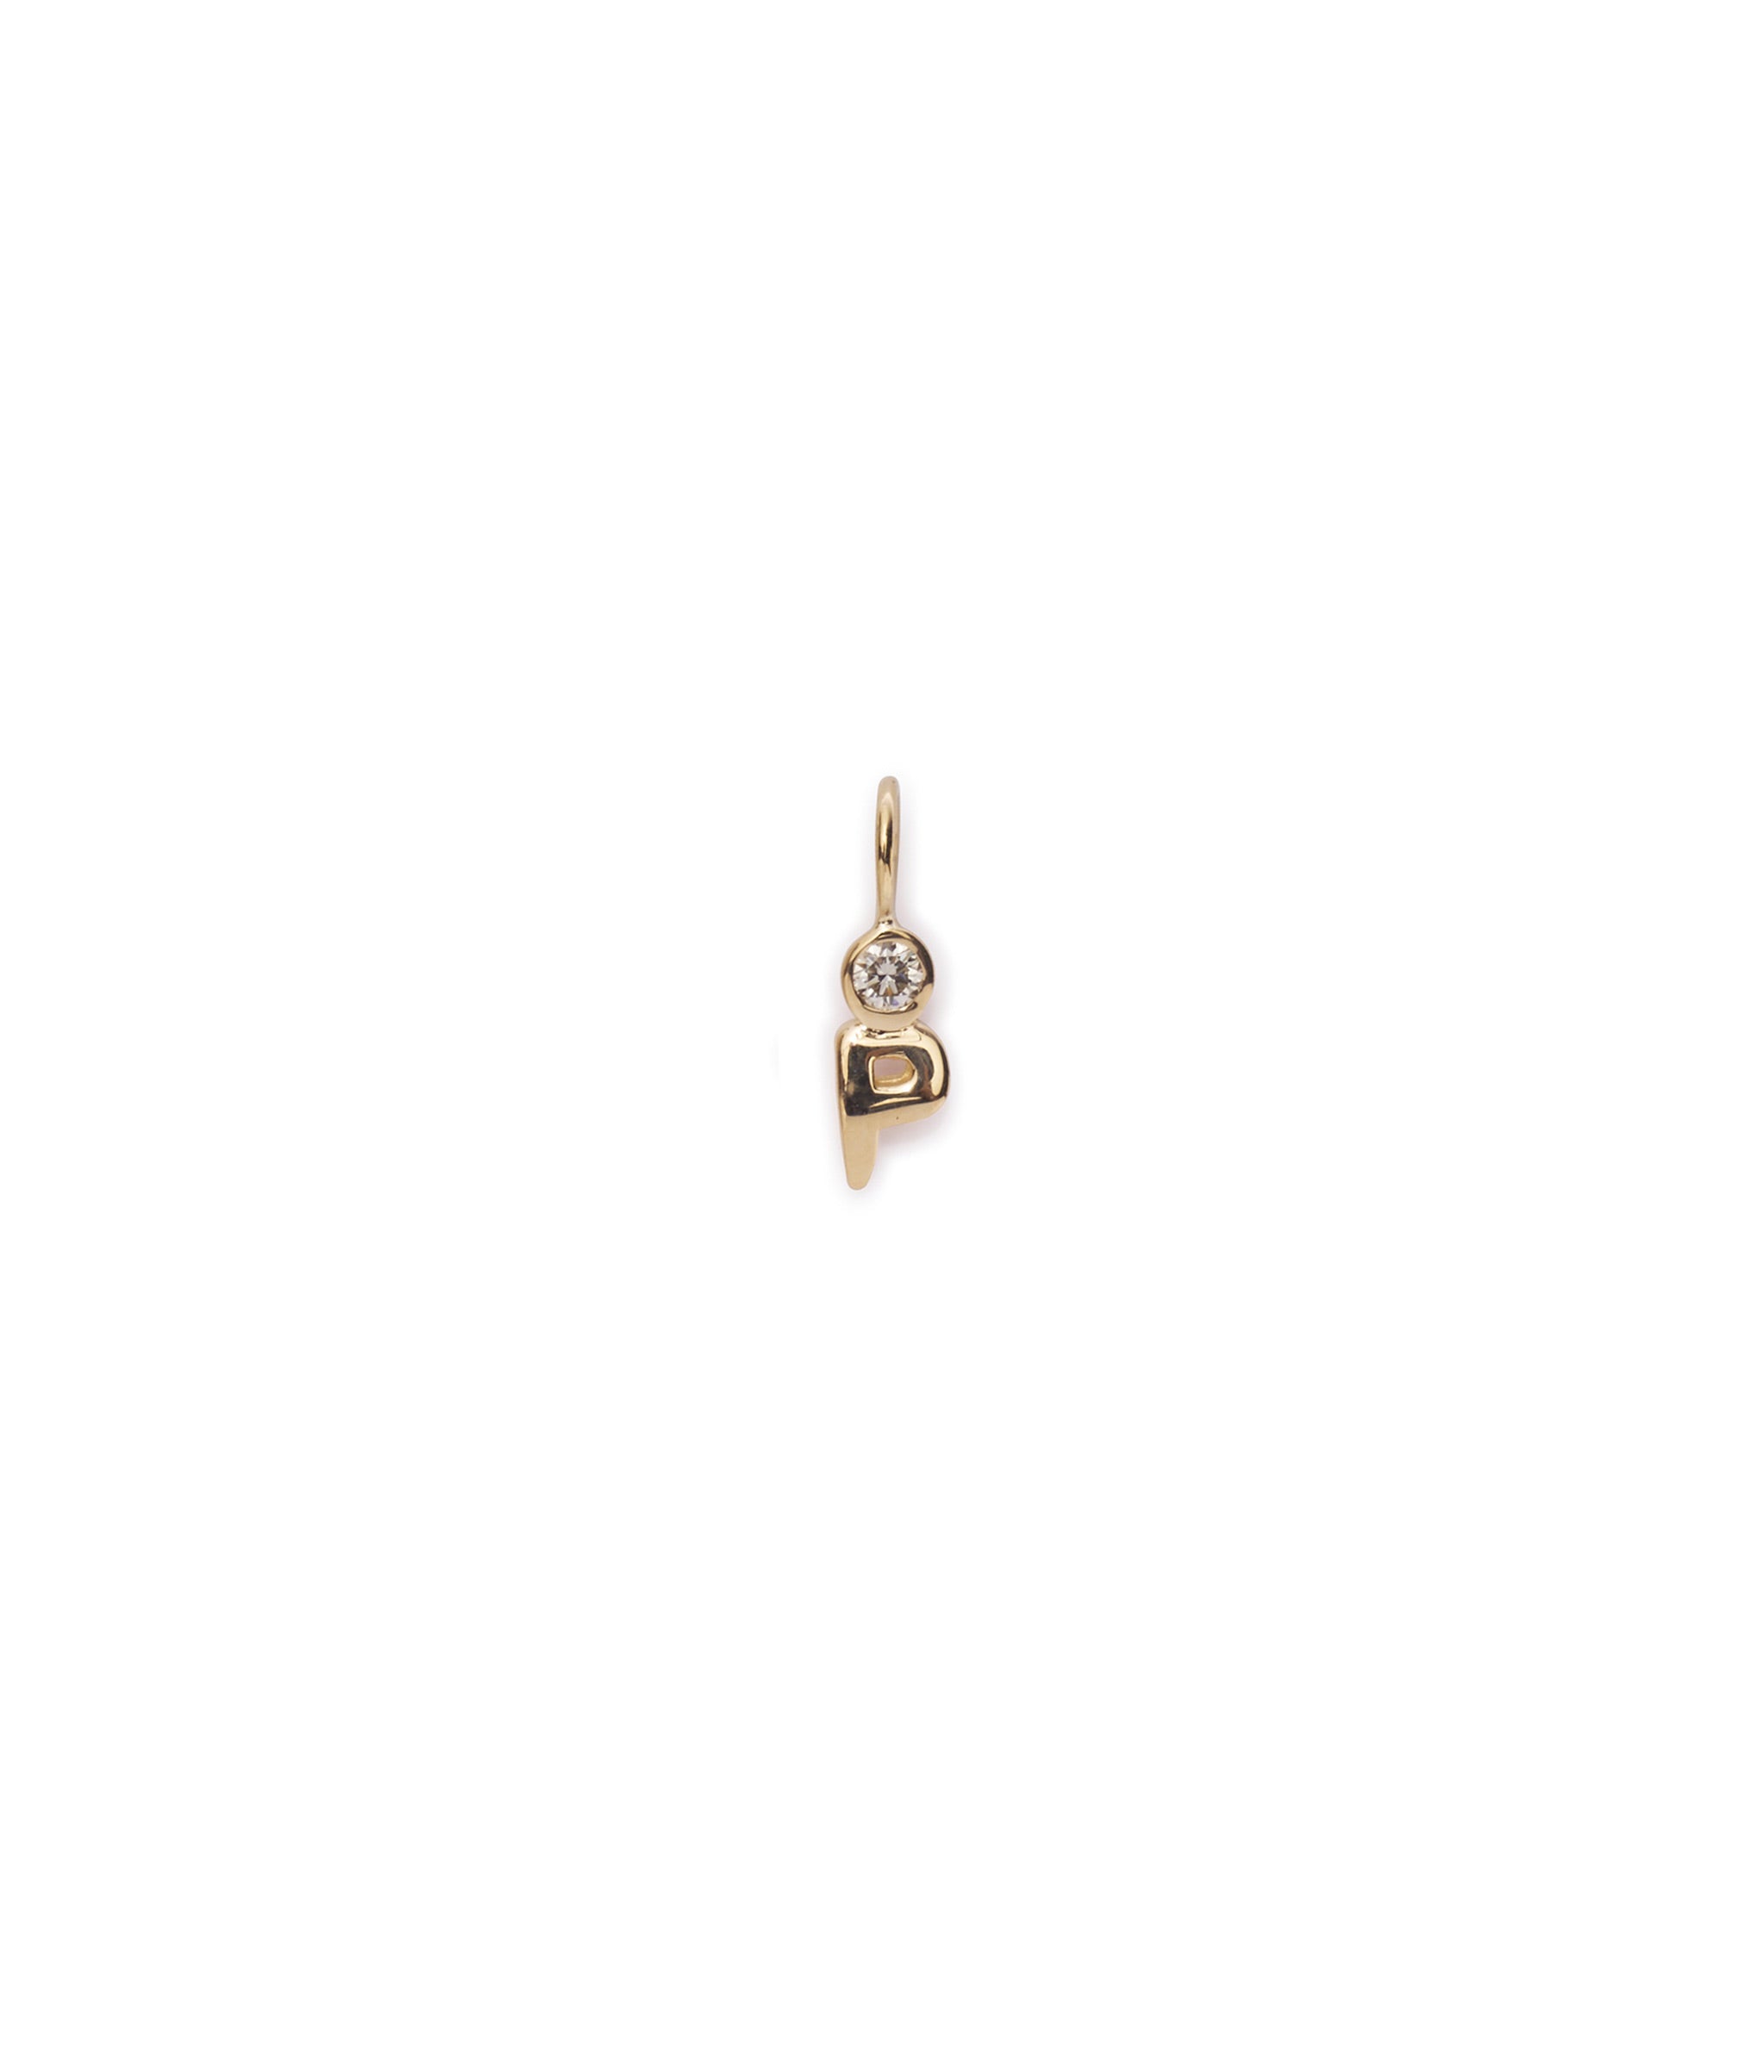 Alphabet Soup "P" Charm. Puffy mini 14k gold letter "P" charm with round diamond accent.